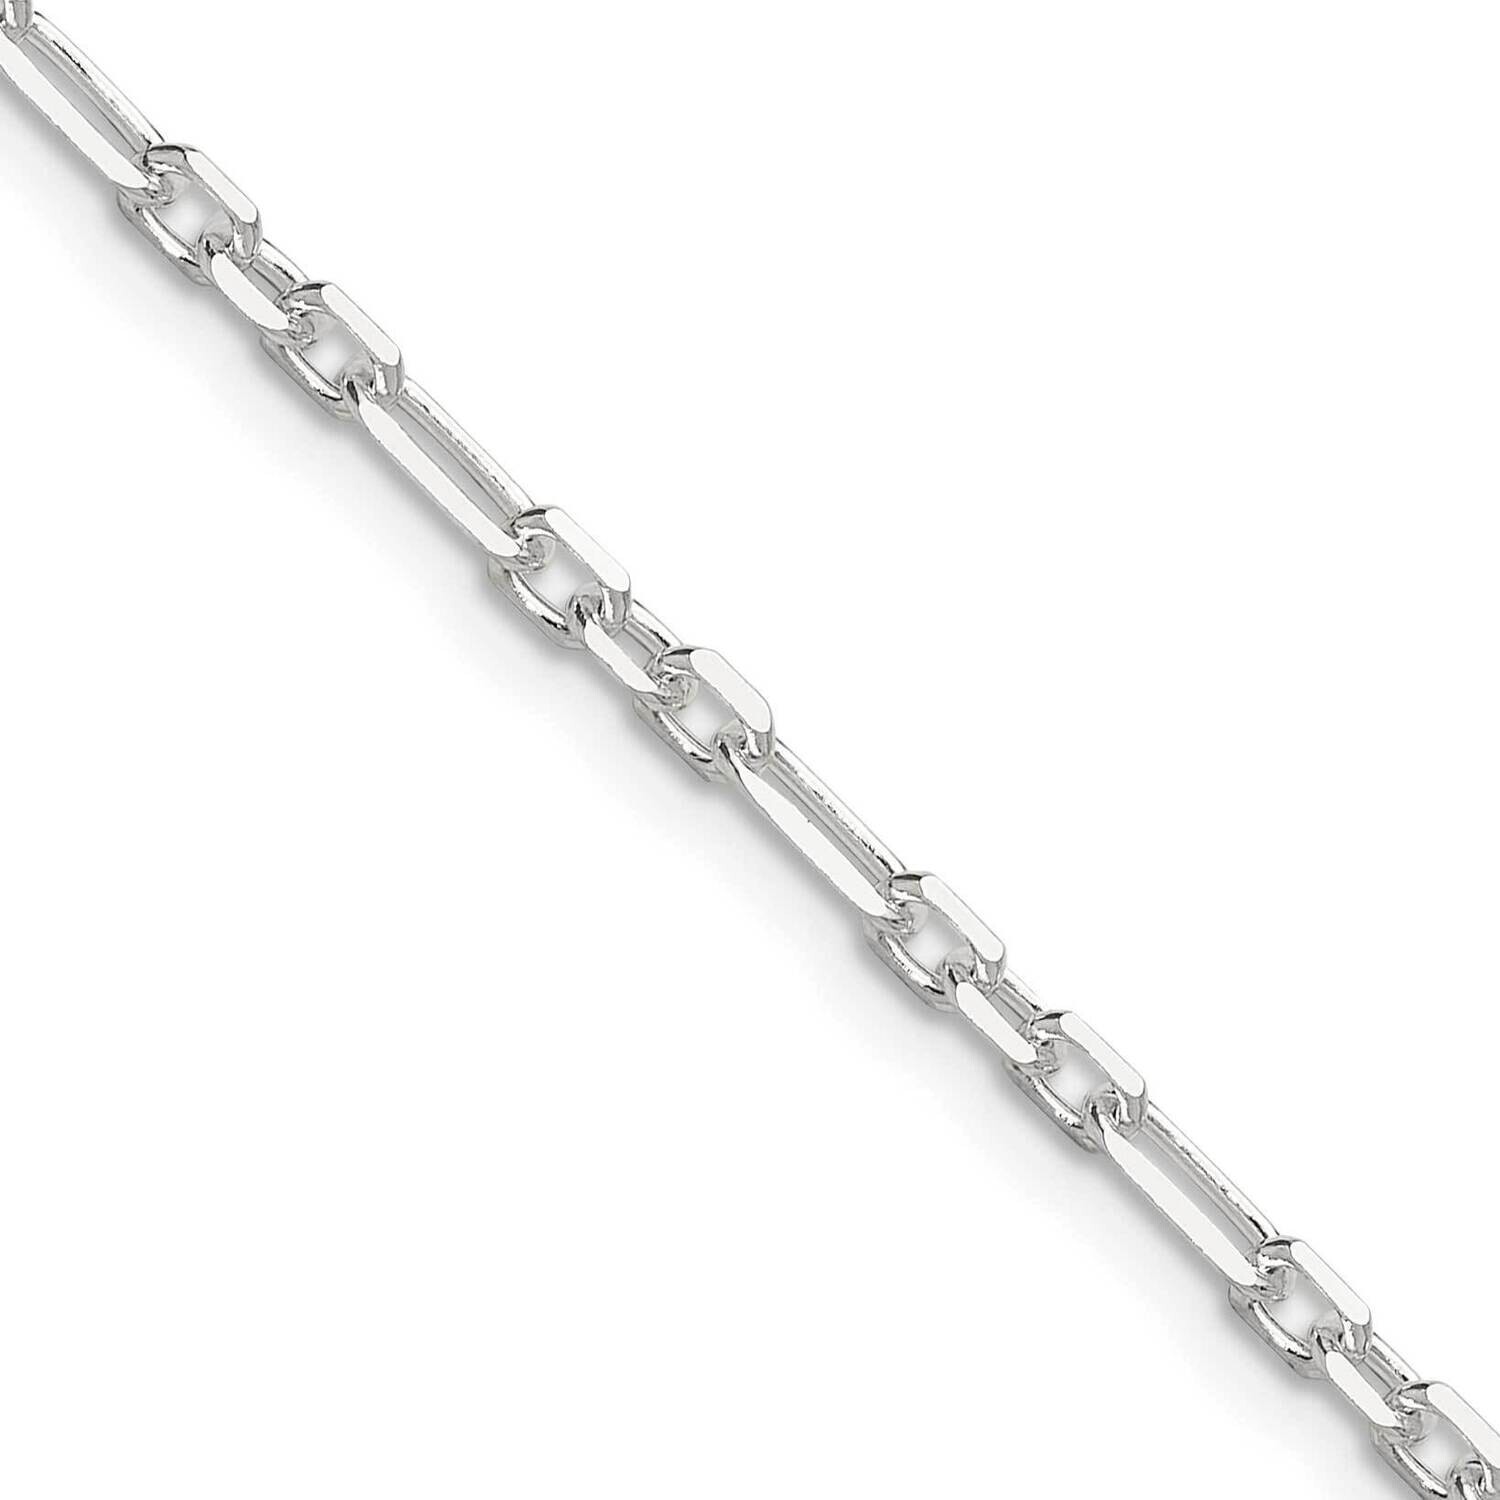 Diamond-Cut 3mm 3 Short Plus 1 Long Cable Link Chain 24 Inch Sterling Silver QFL080-24